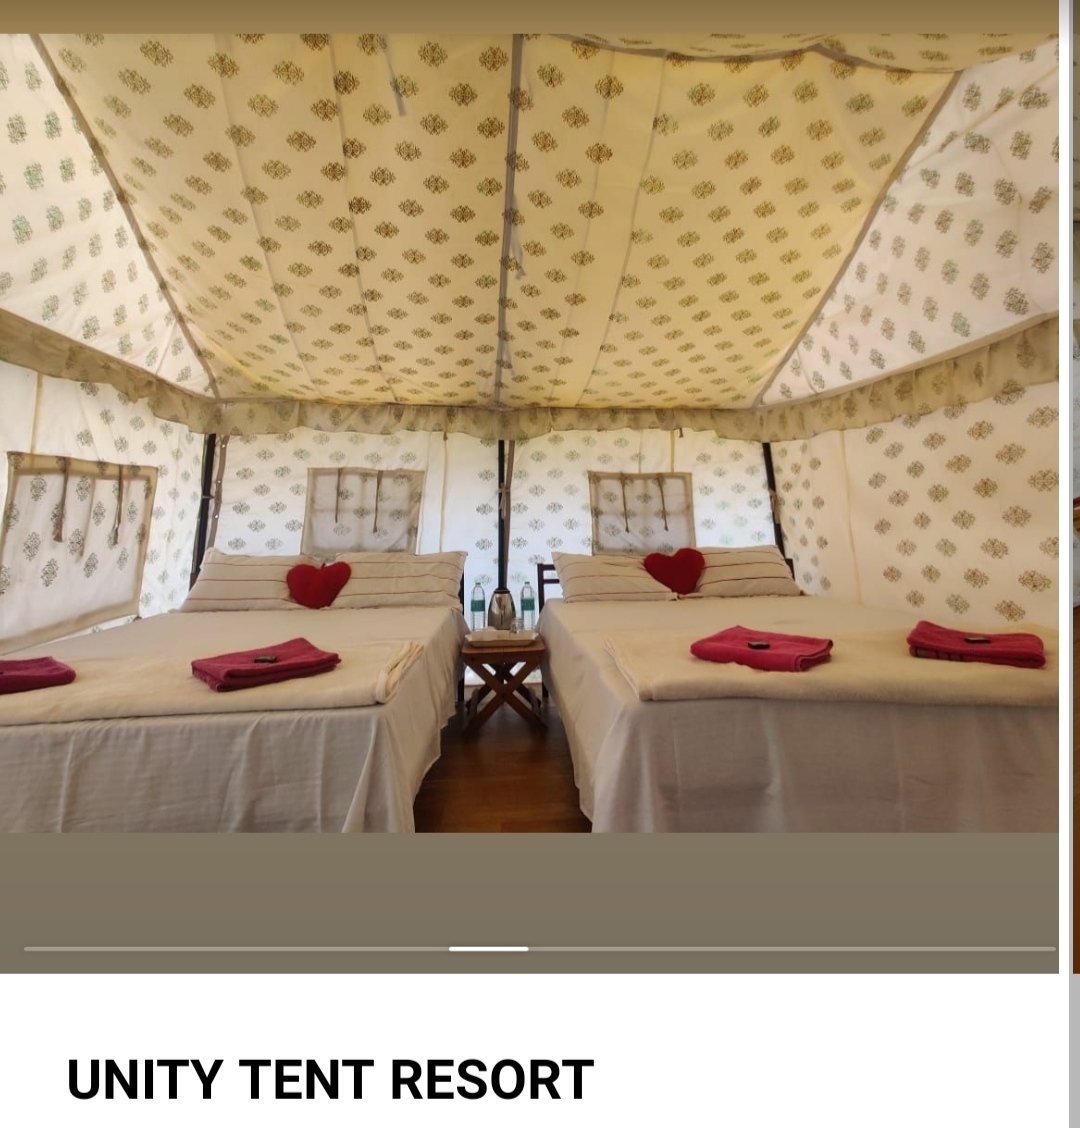 <span  class="uc_style_uc_tiles_grid_image_elementor_uc_items_attribute_title" style="color:#ffffff;">Unity Holiday Resort Tent Image</span>